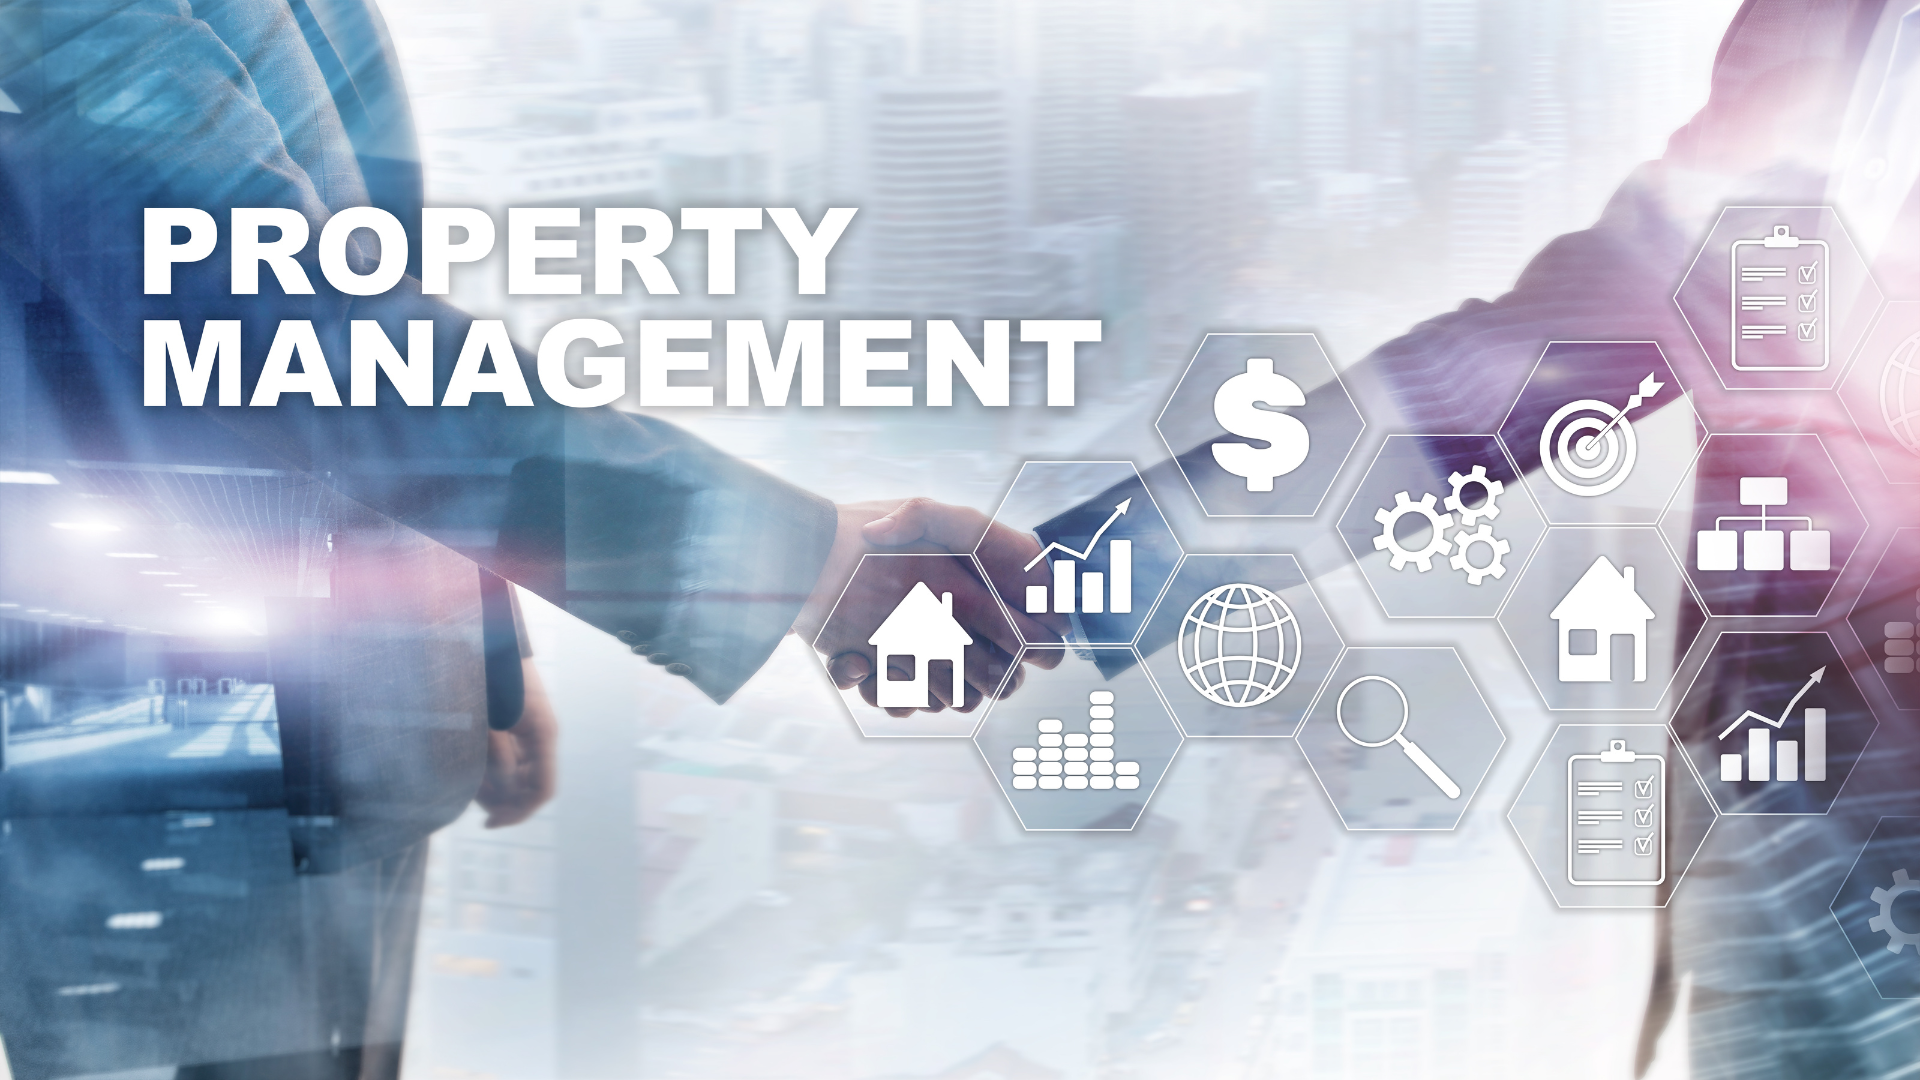 Why Hire A Property Manager?